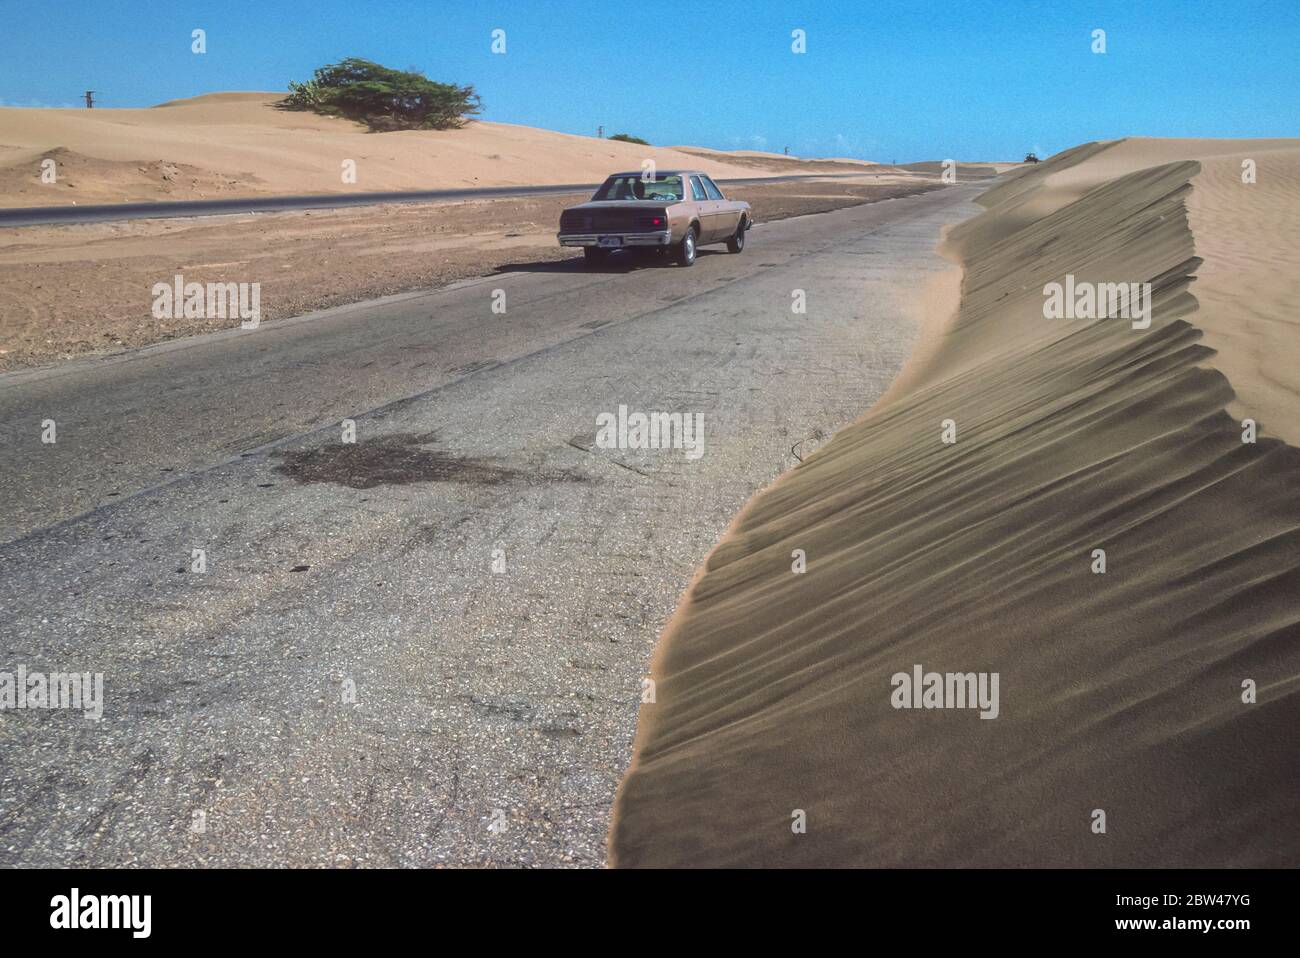 FALCON STATE, VENEZUELA - Car on road with drifting sand covering highway, Paraguana Peninsula. Stock Photo